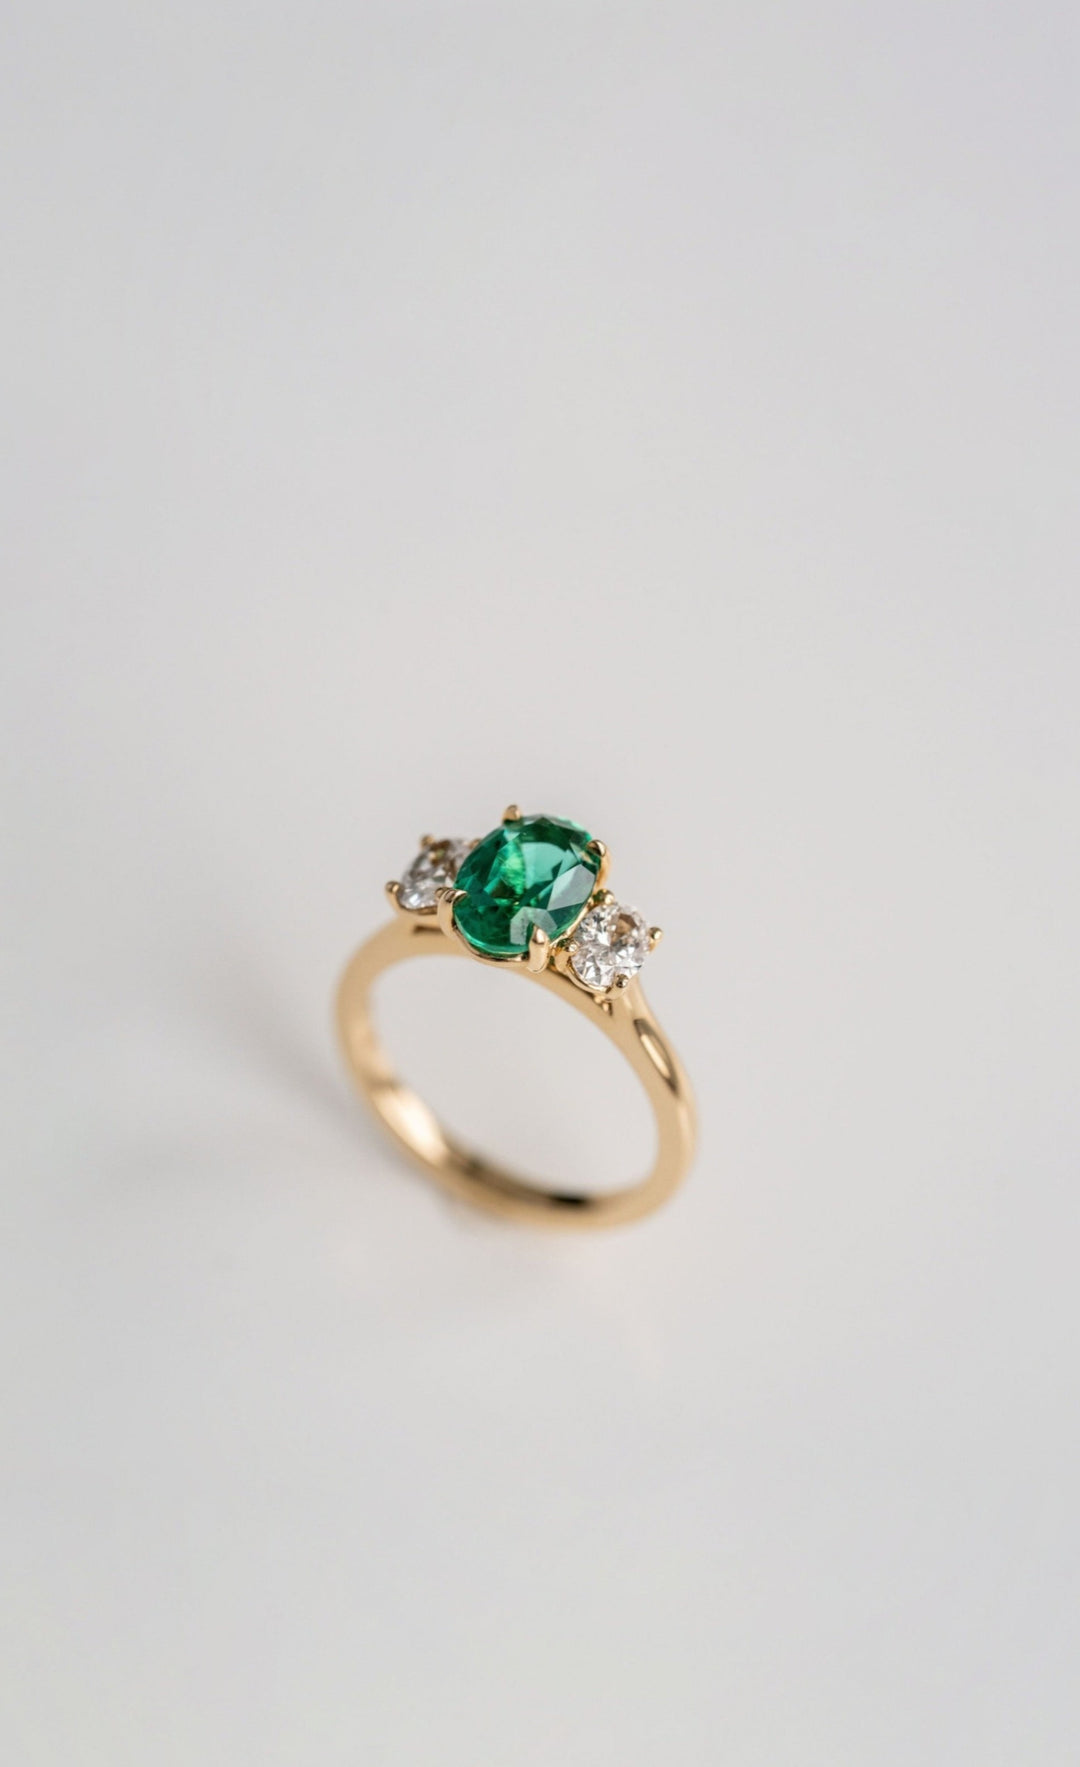 Oval Emerald With Oval Diamond Accents